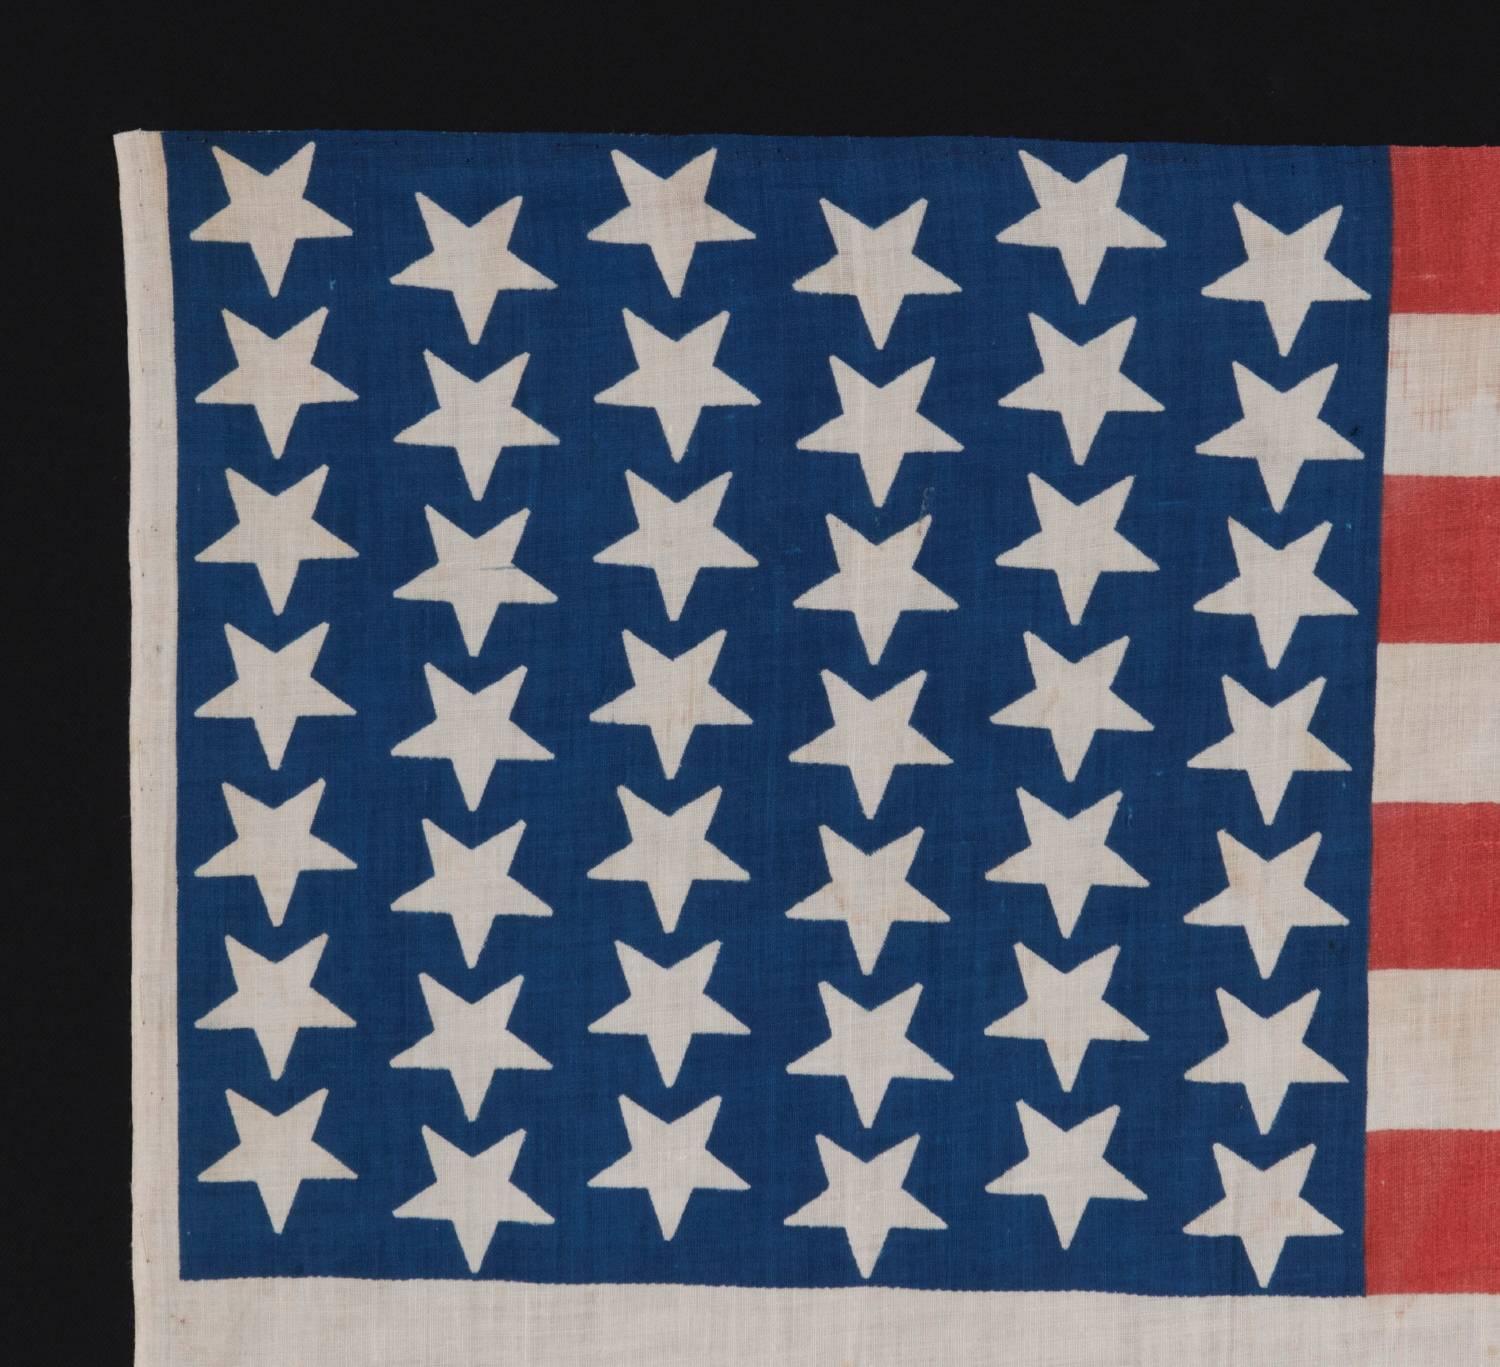 American 42 Star Flag with Upside Down Stars in a Wave Configuration